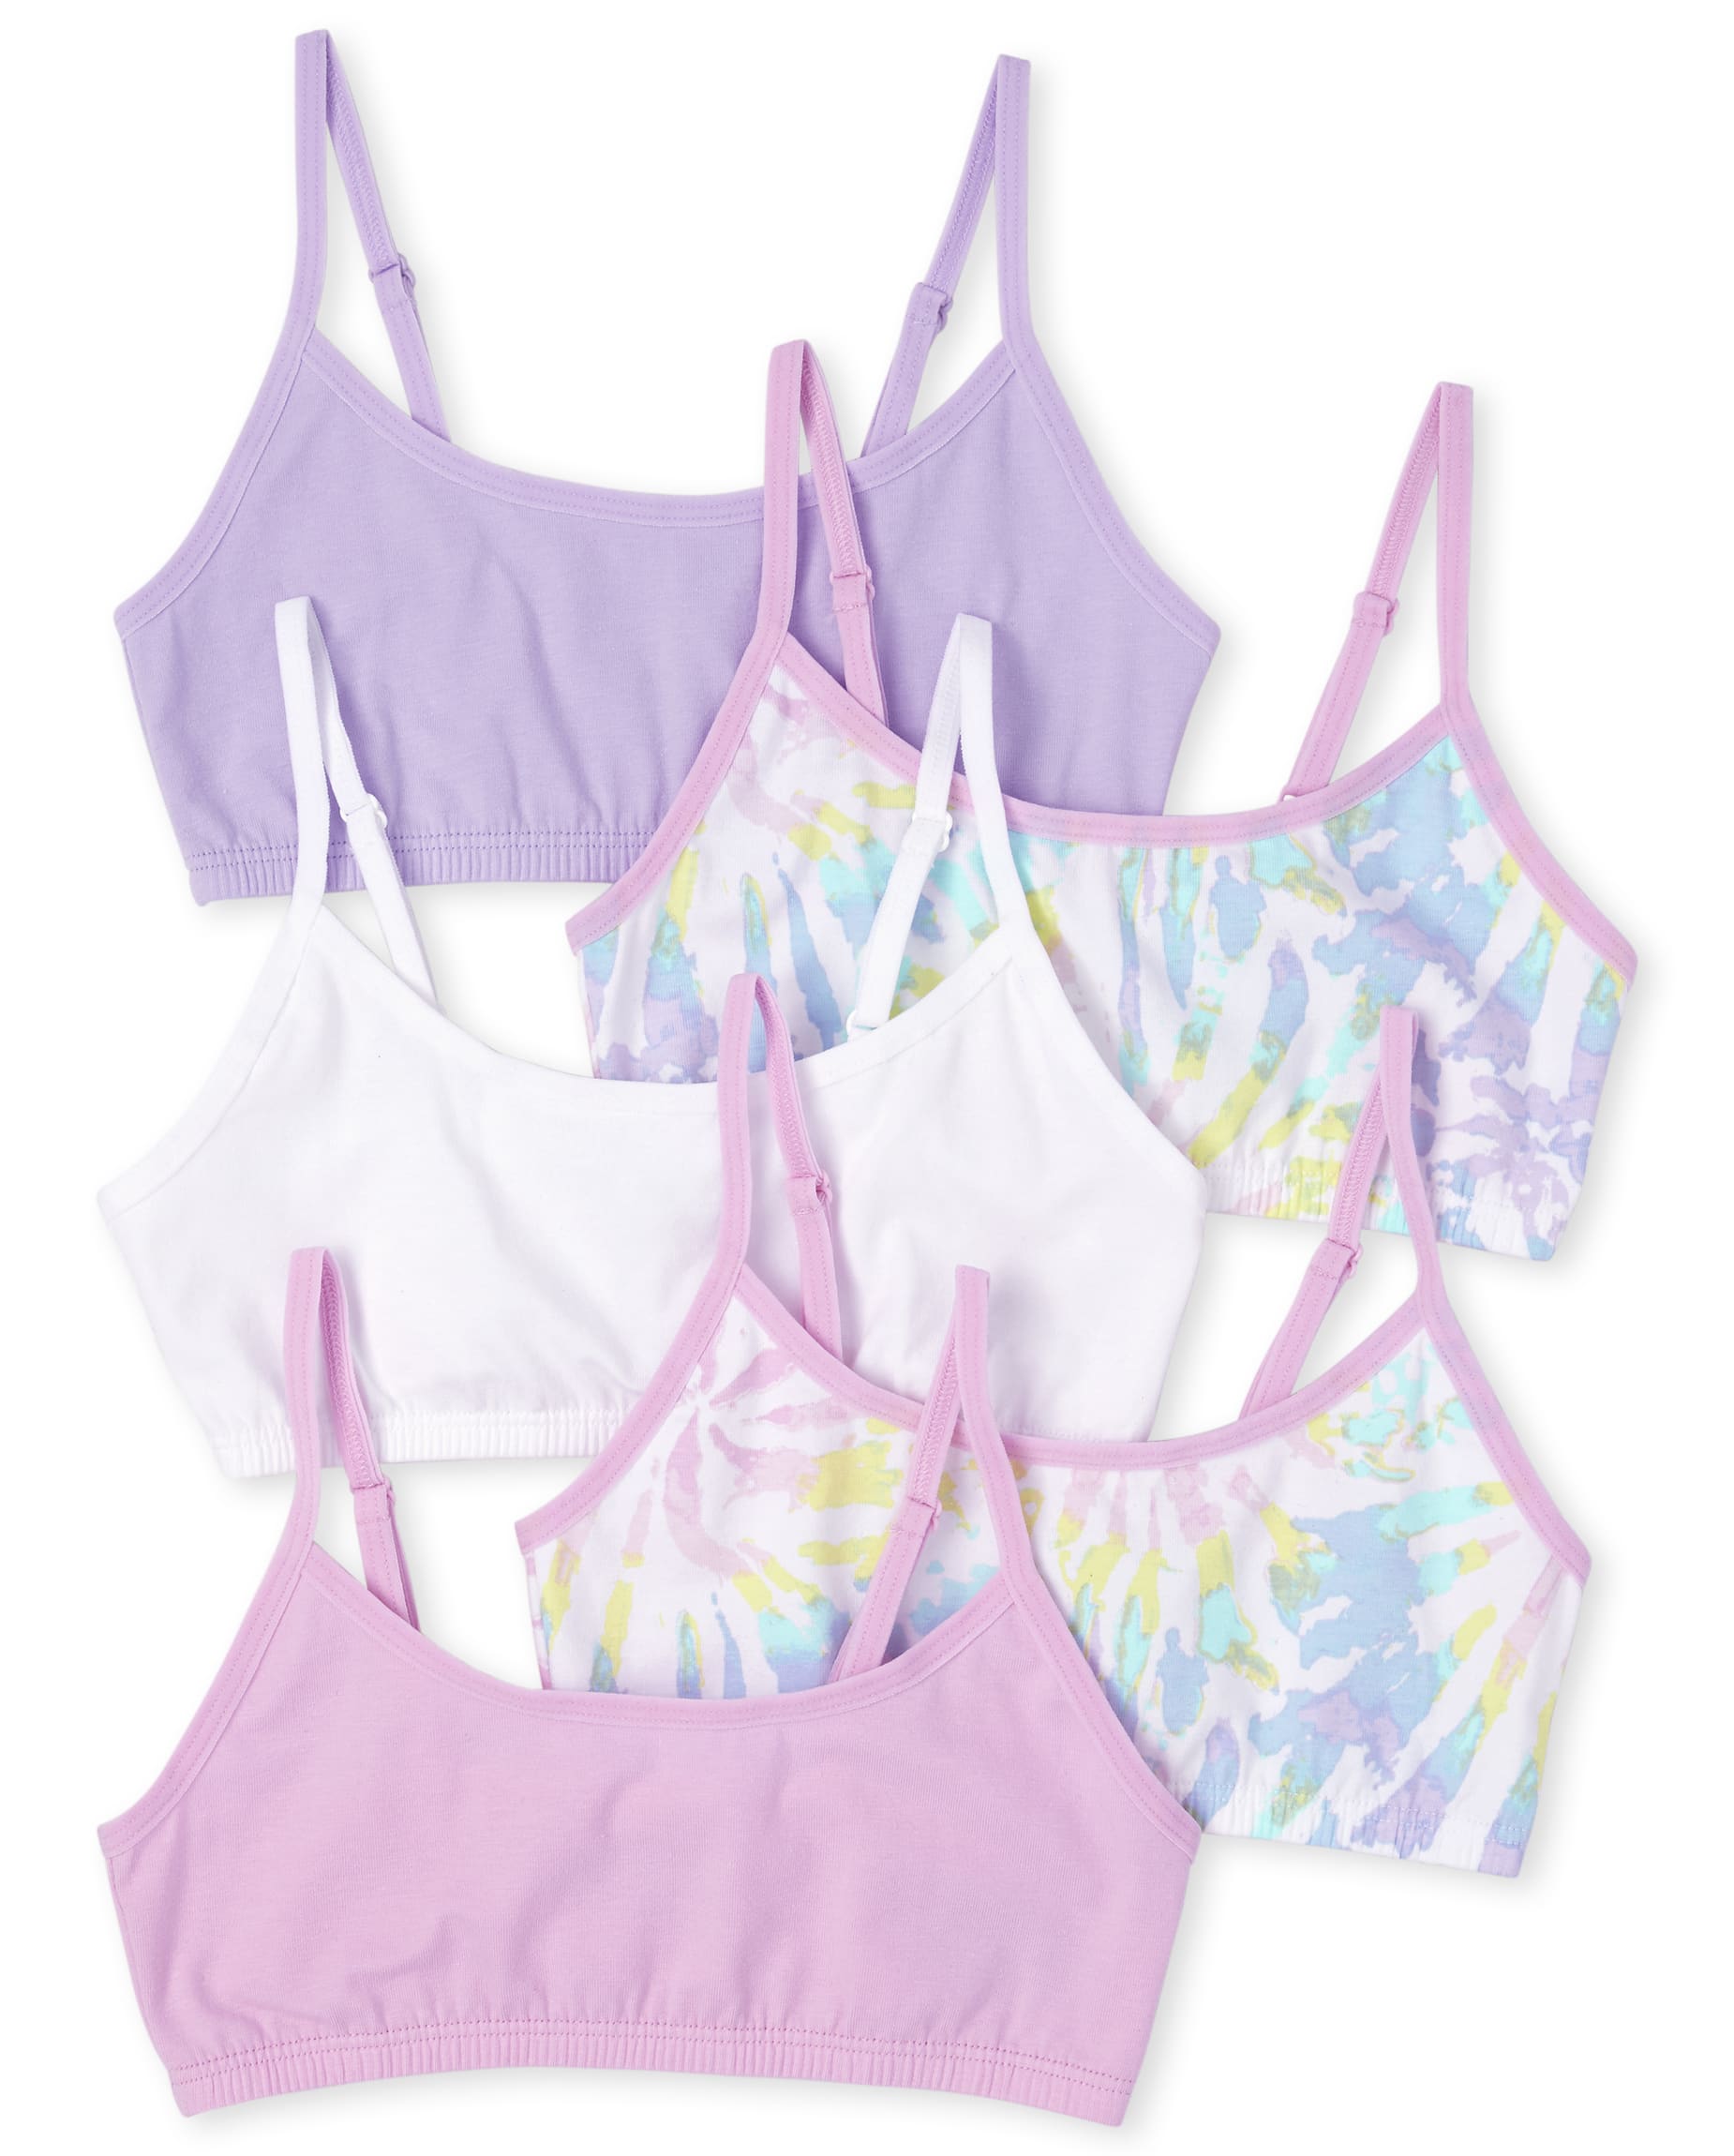 The Children's Place:  5-Pack Girls' Tie Dye Bralette Set (Size 4 or 5/6) $4.68 + Free Shipping